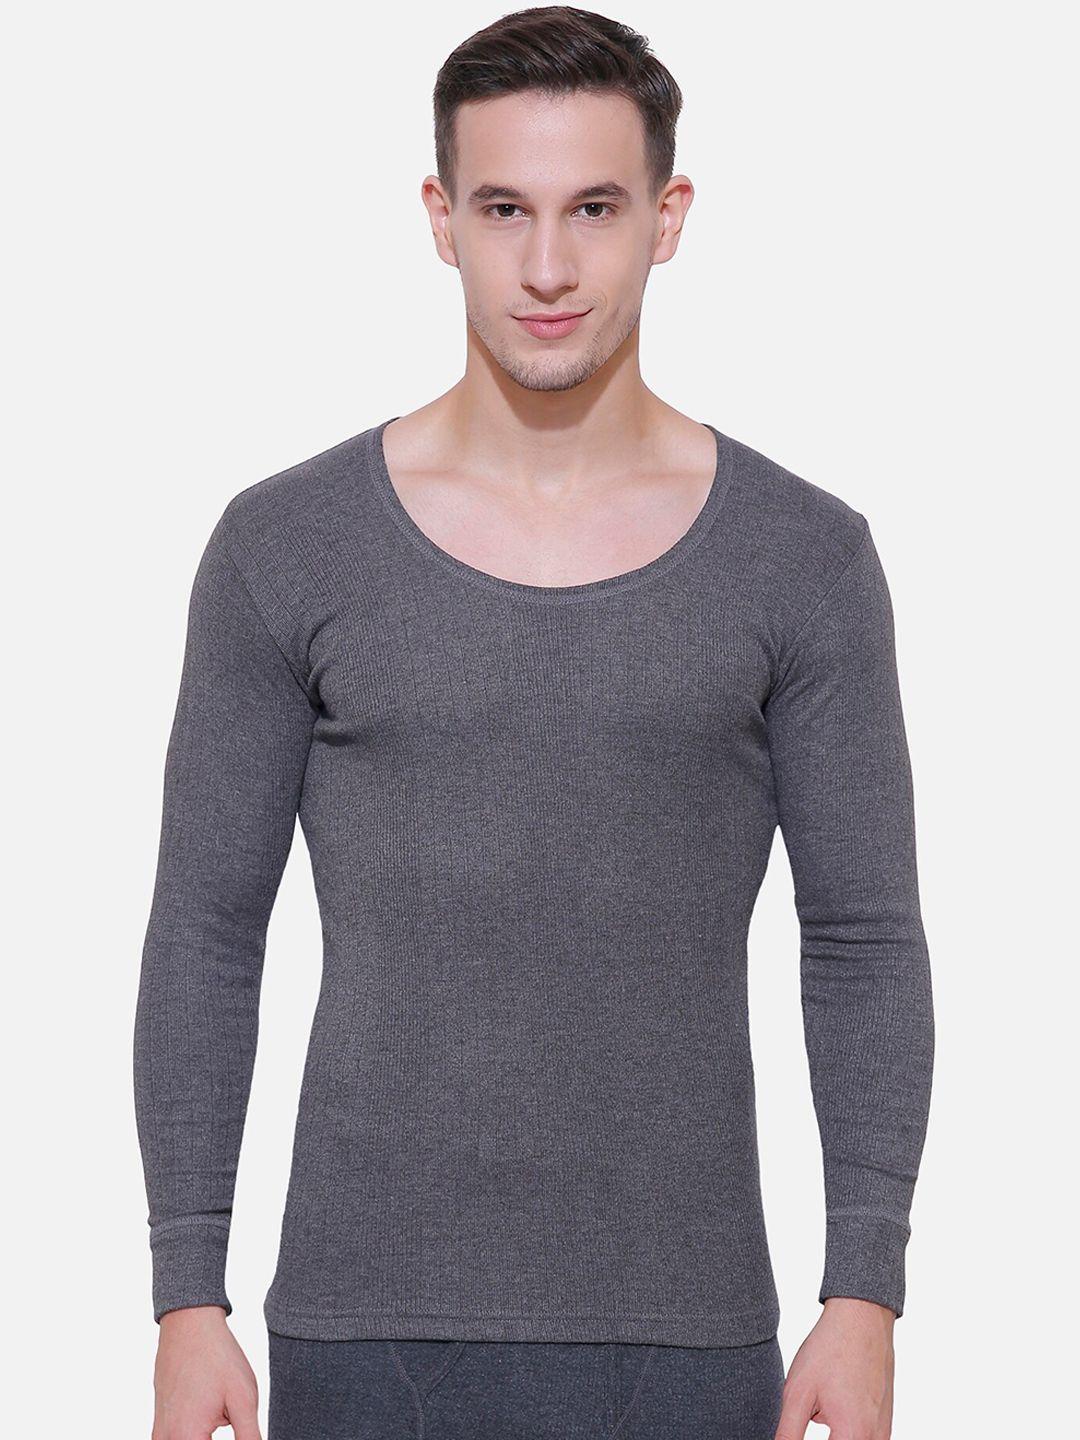 bodycare insider men charcoal grey striped slim-fit thermal top